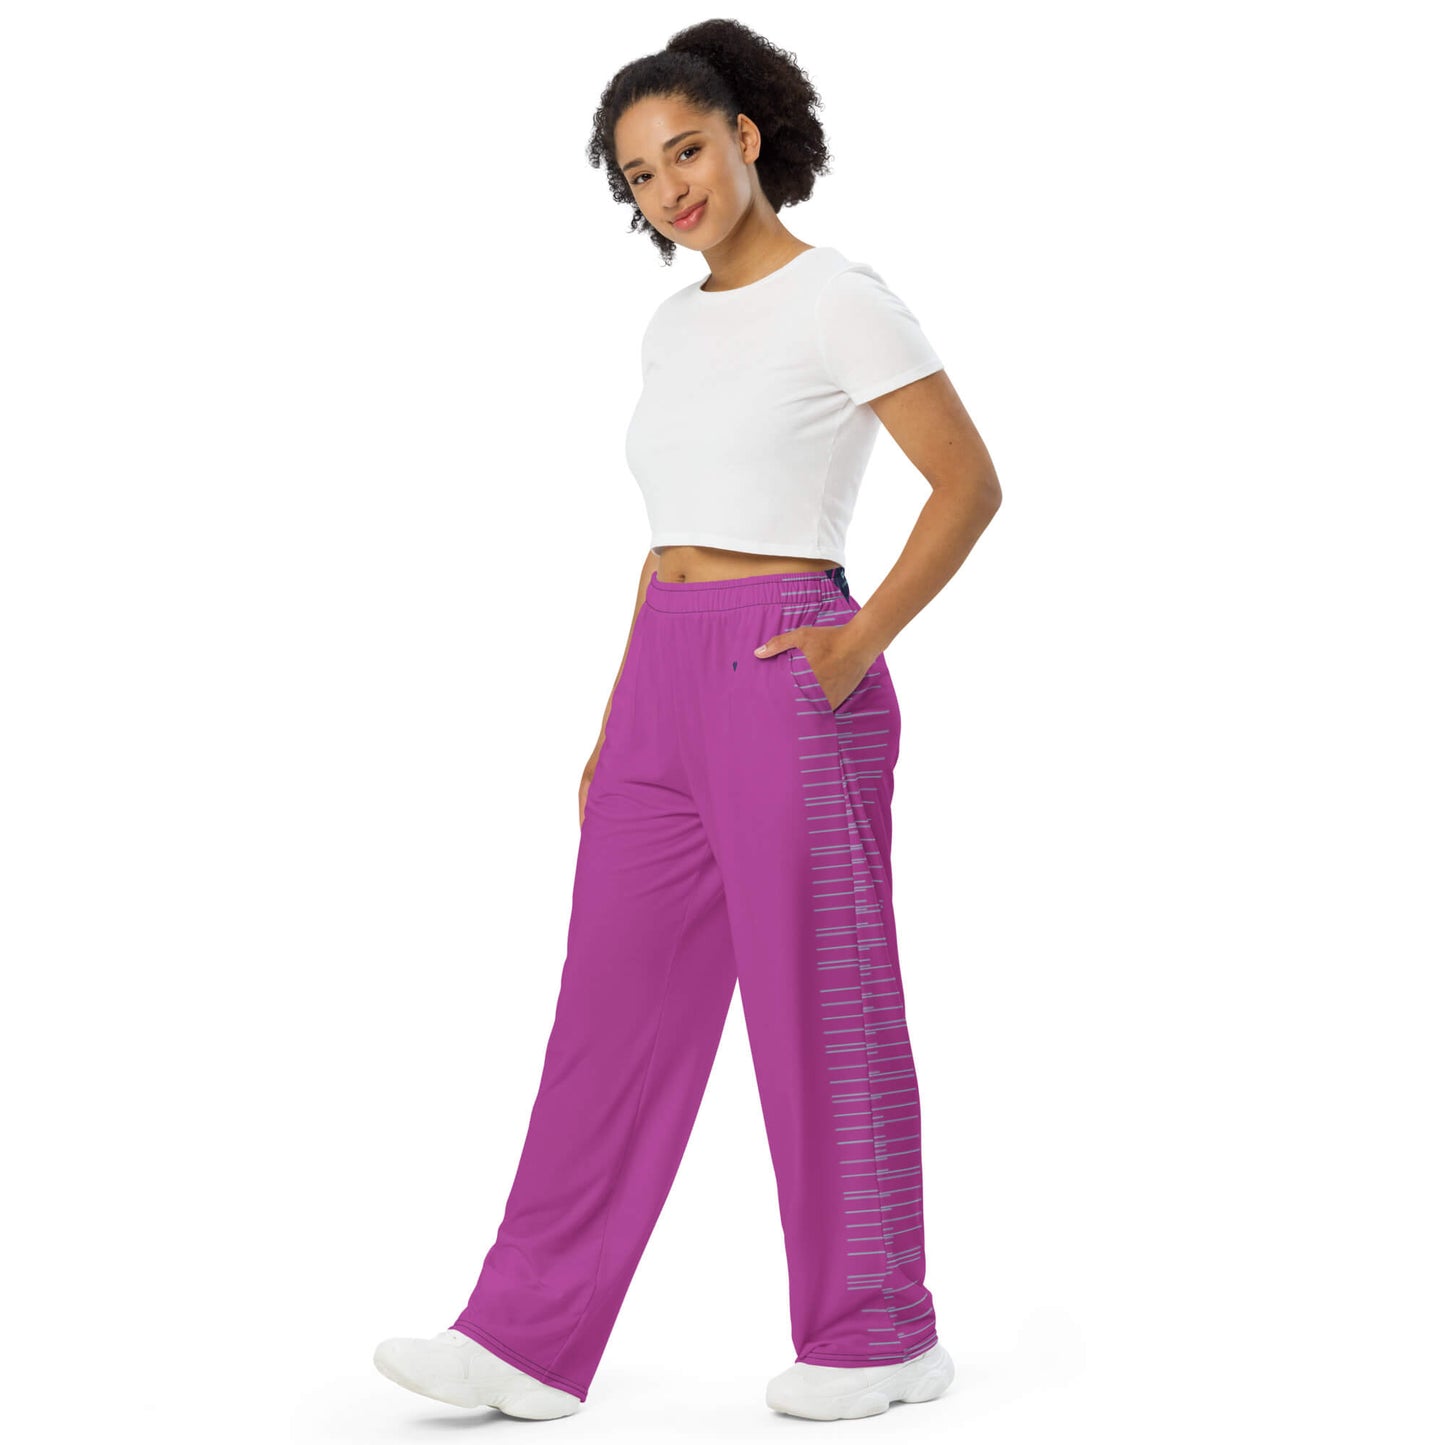 Wide-Leg Fucsia Pink Dual Pants for Comfort and Style